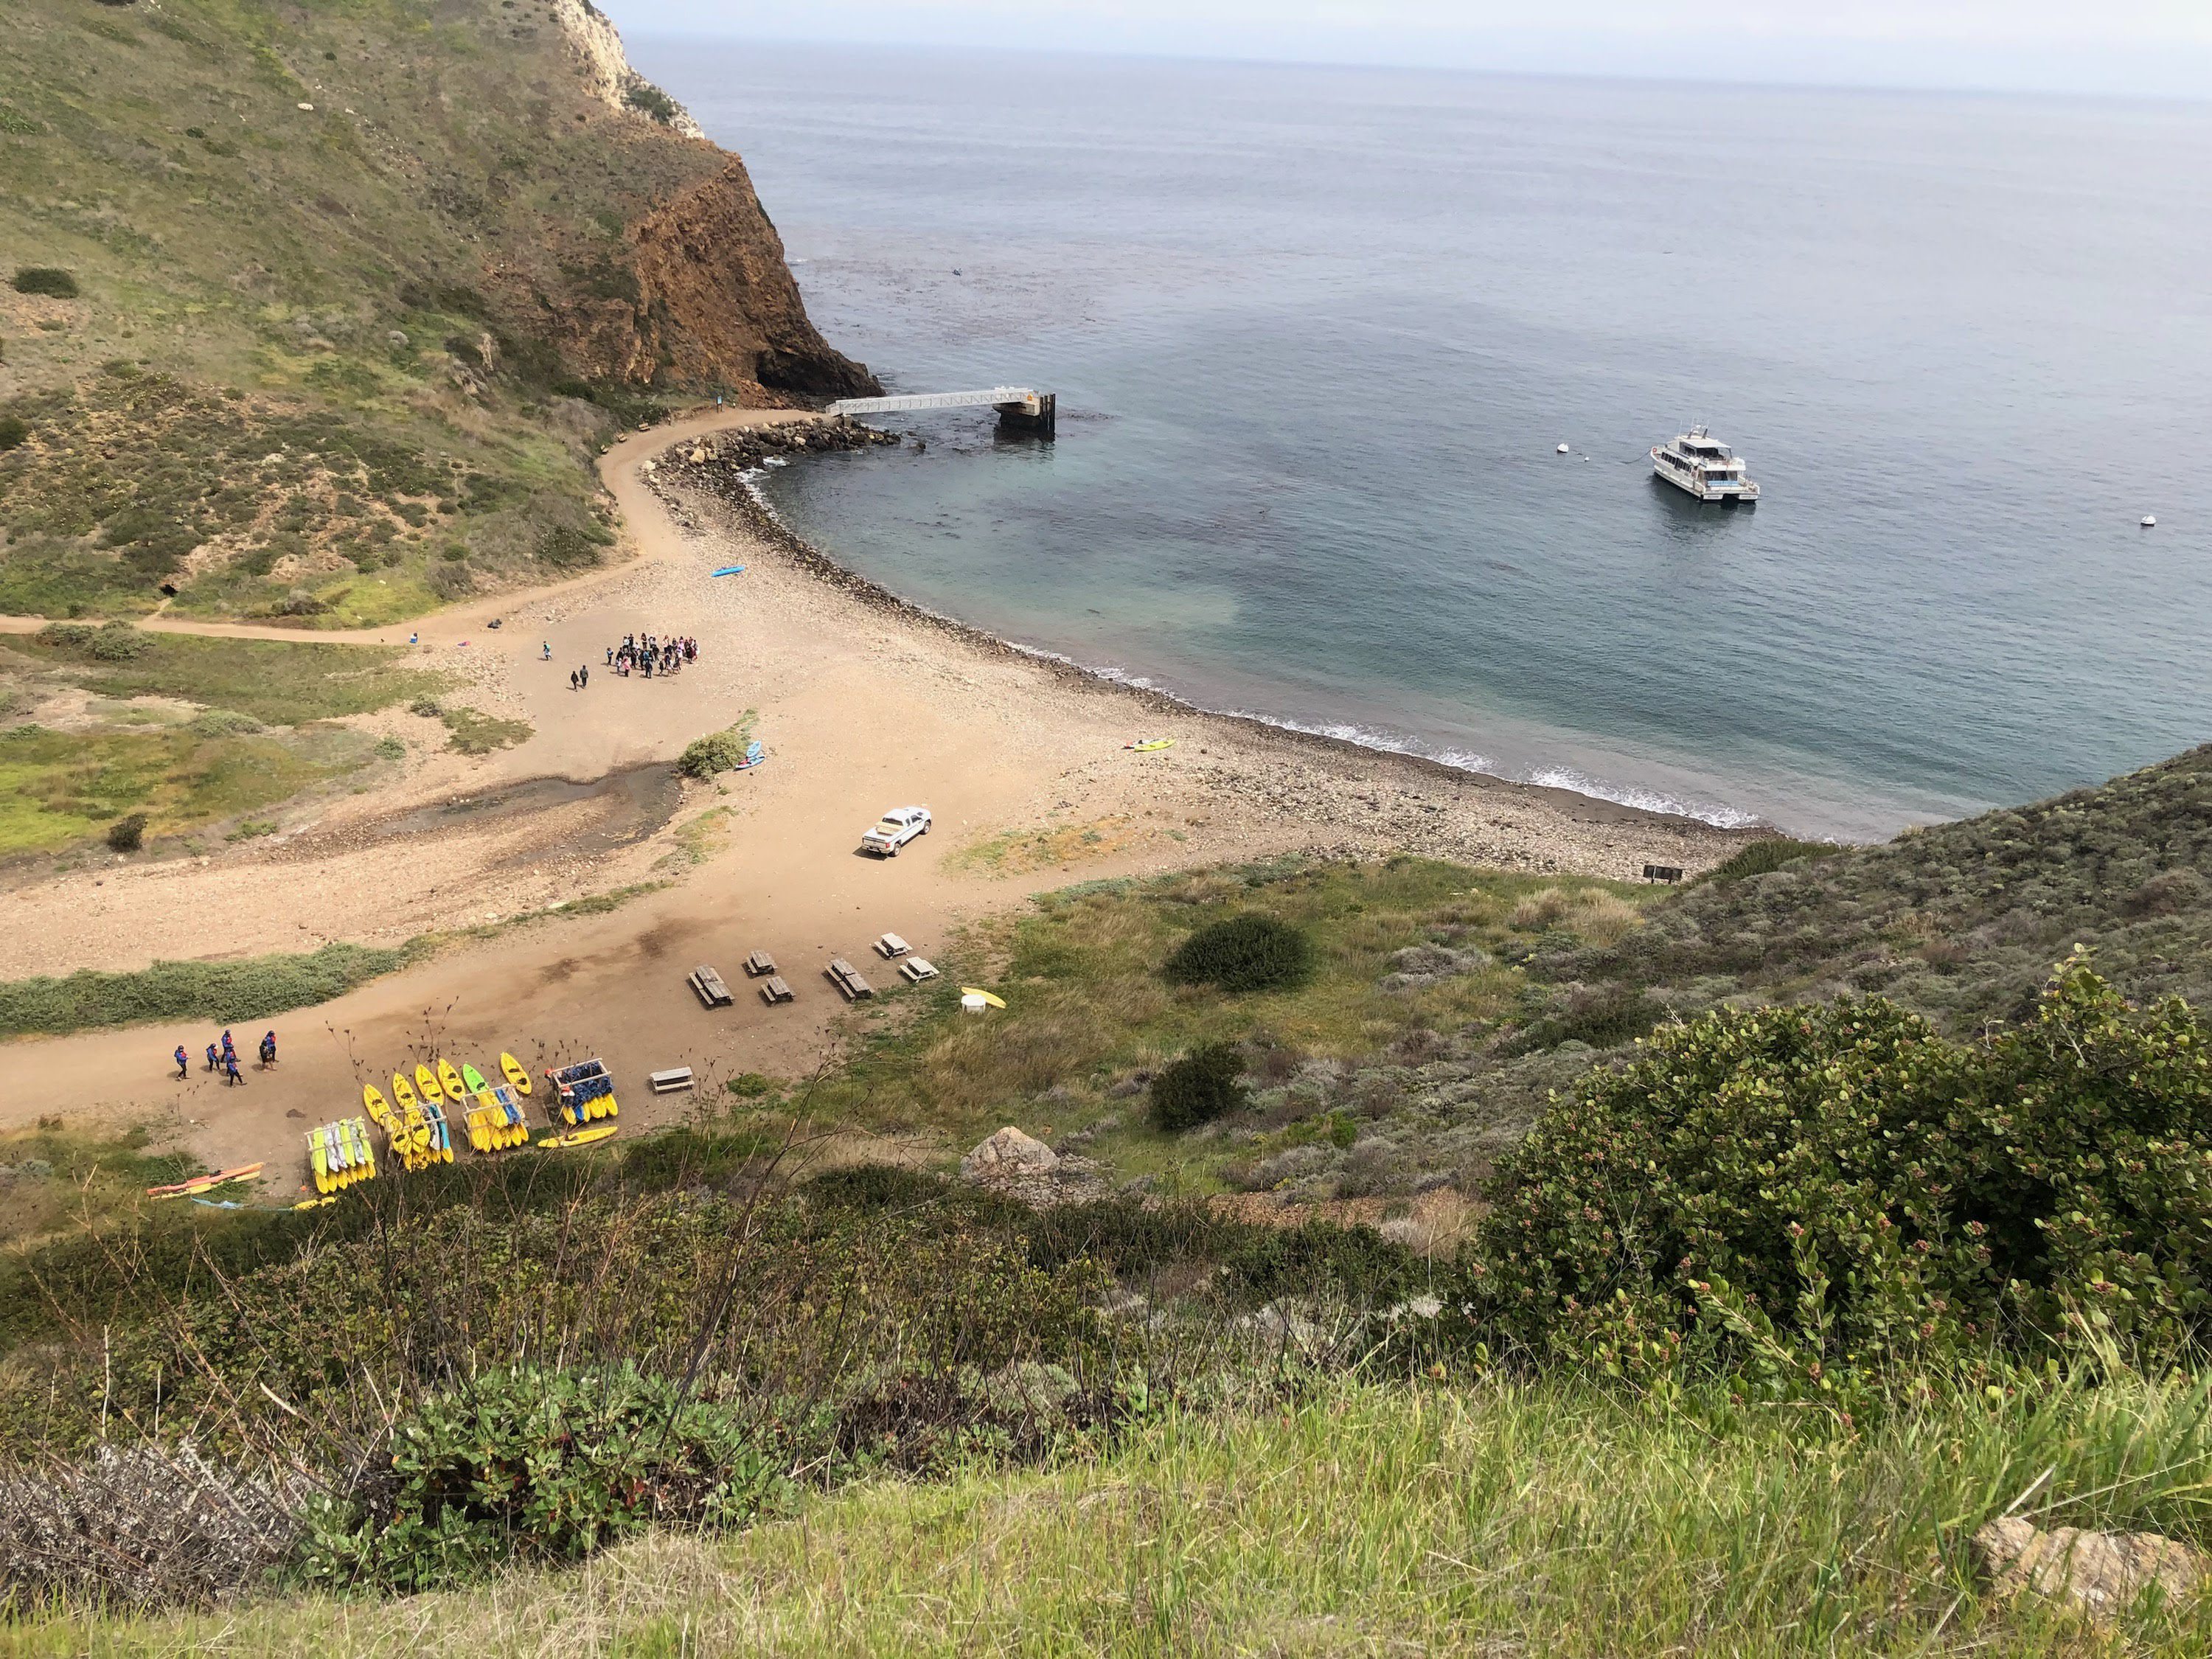 A view from a hilltop overlooking a bay in Channel Islands National Park.